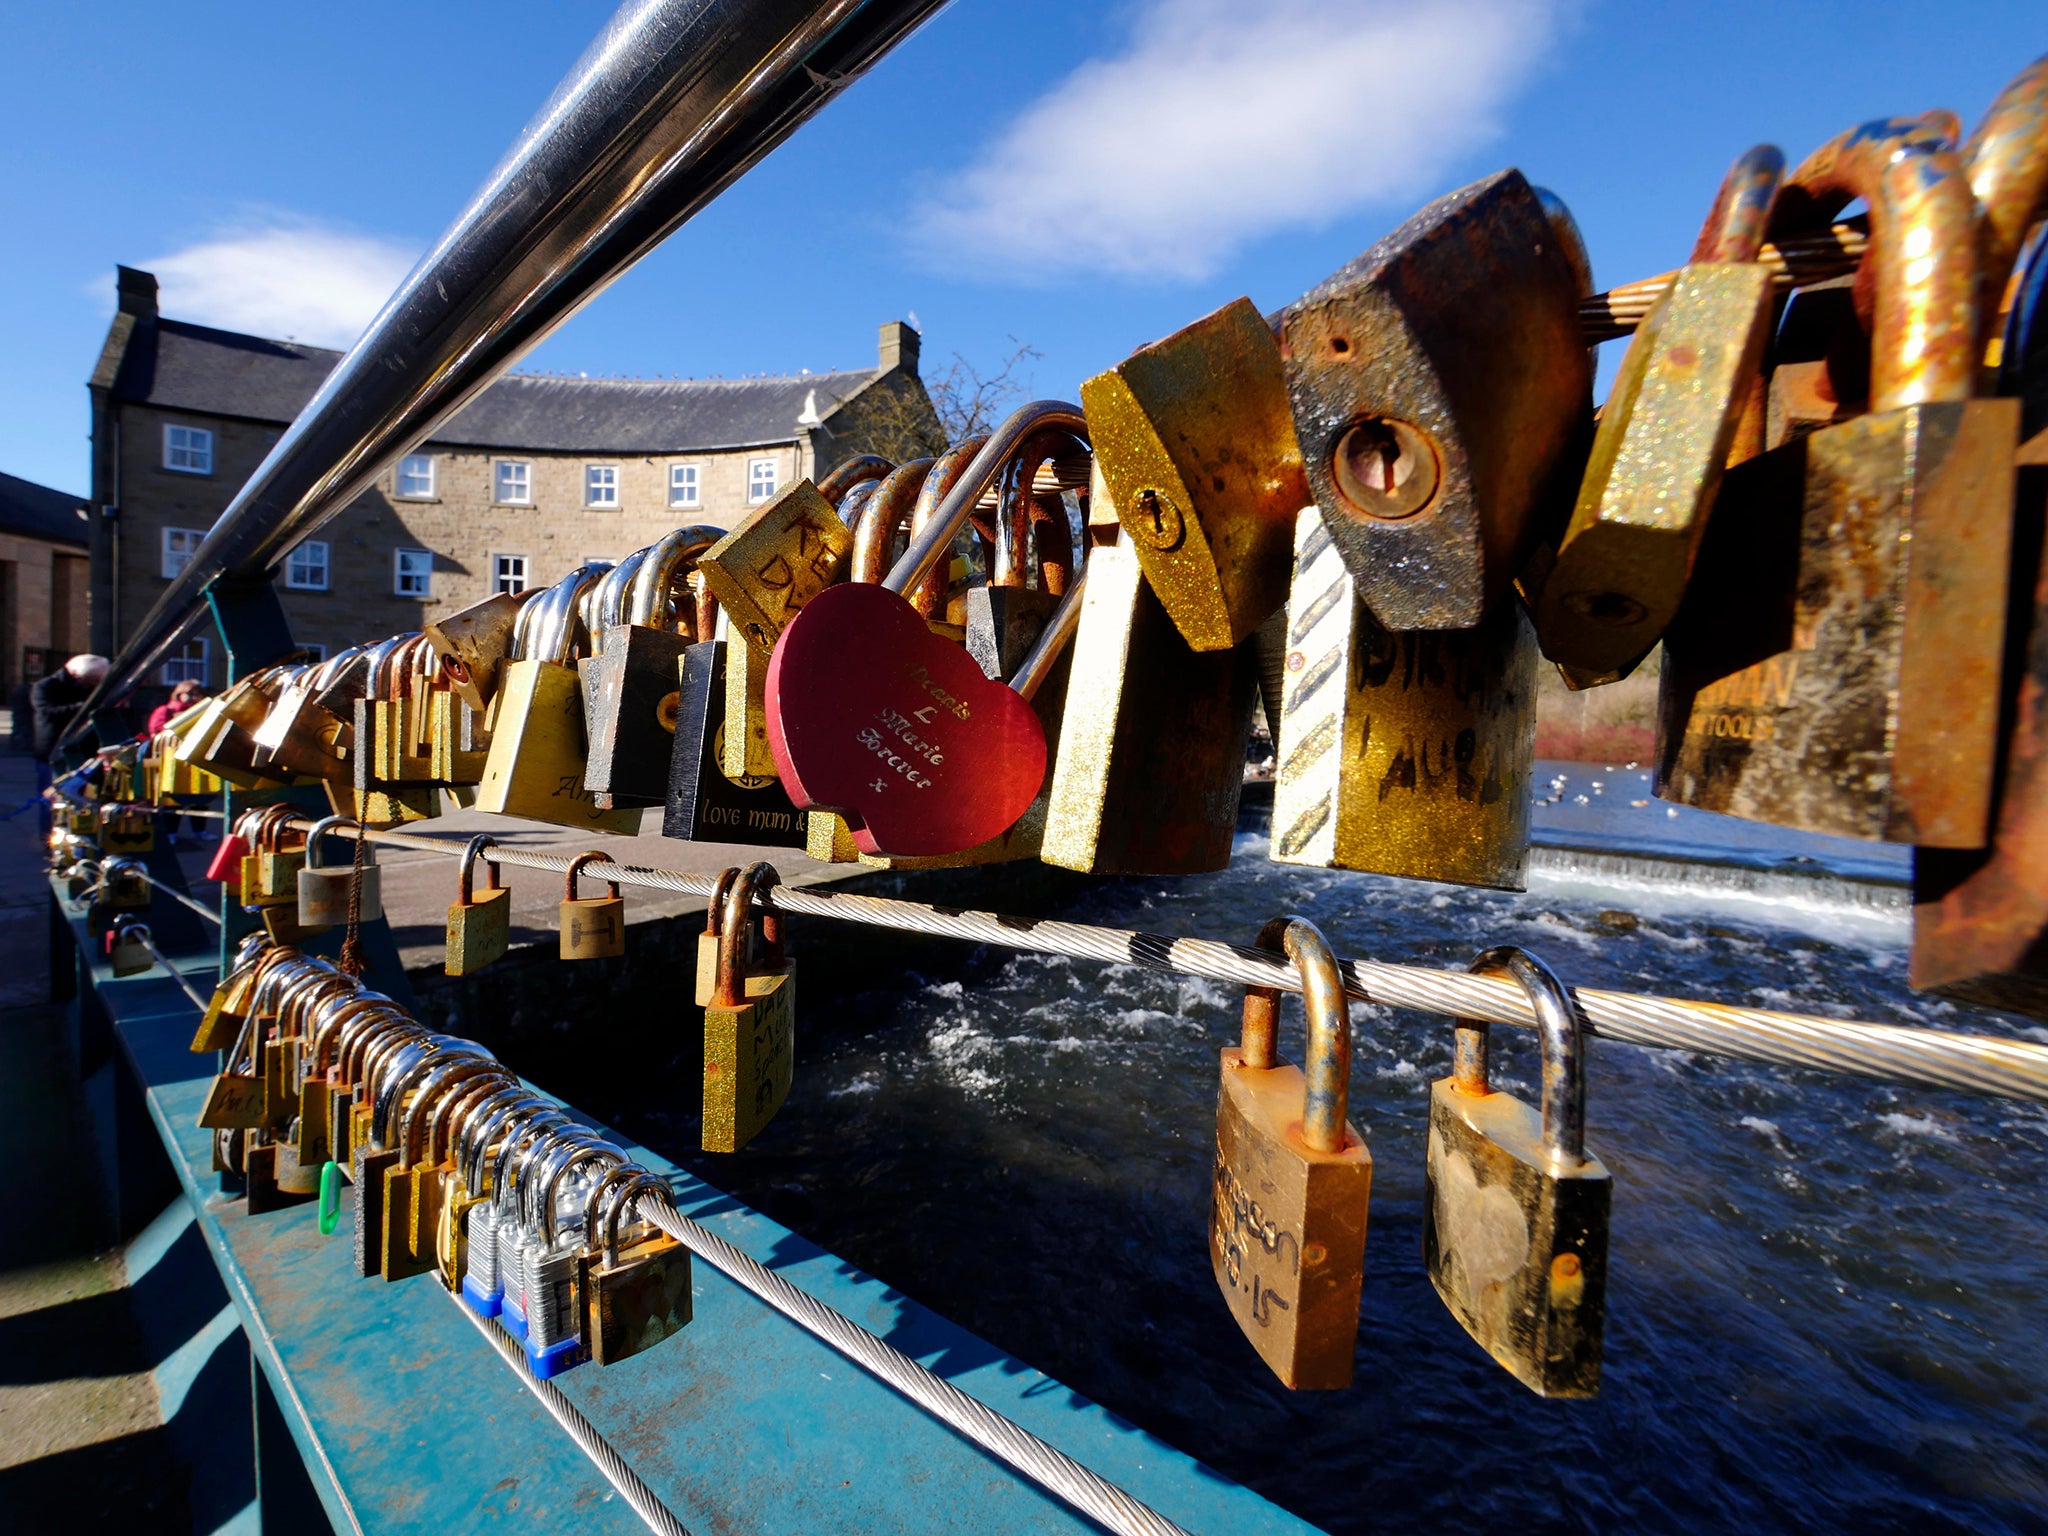 Thousands of love locks have been locked onto the bridge since 2012